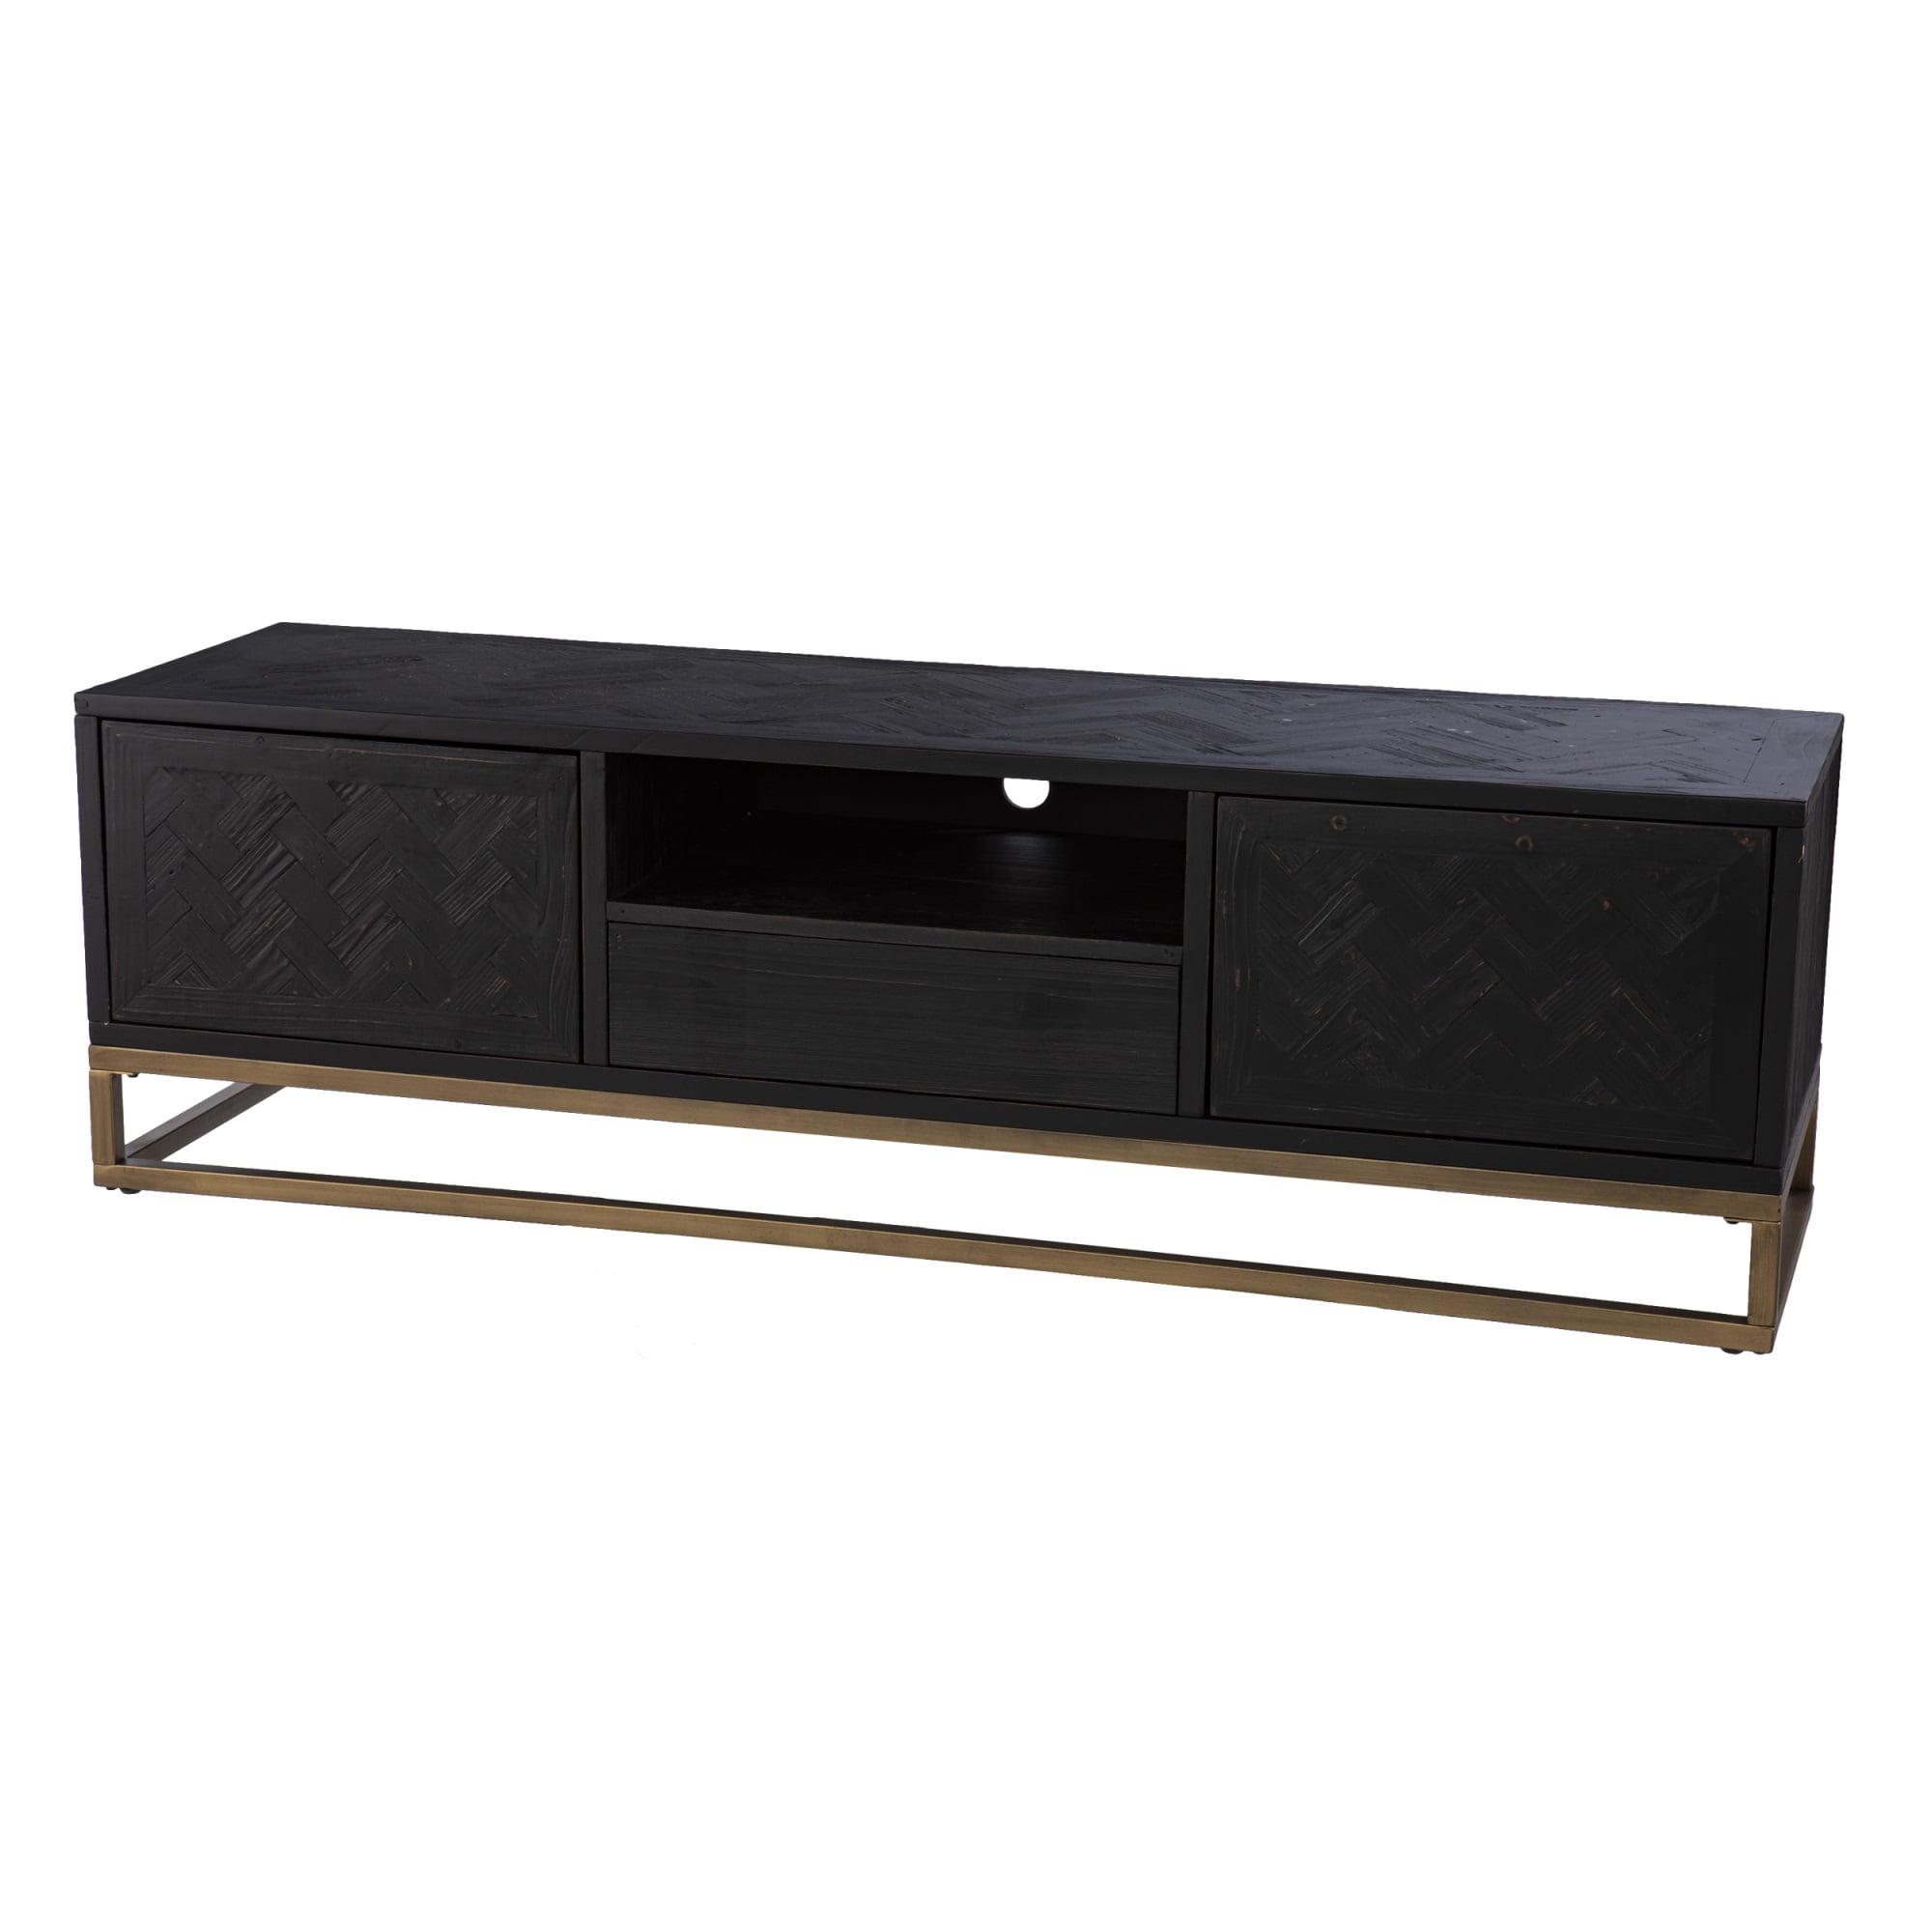 Modern Black Reclaimed Wood Media Console with Storage